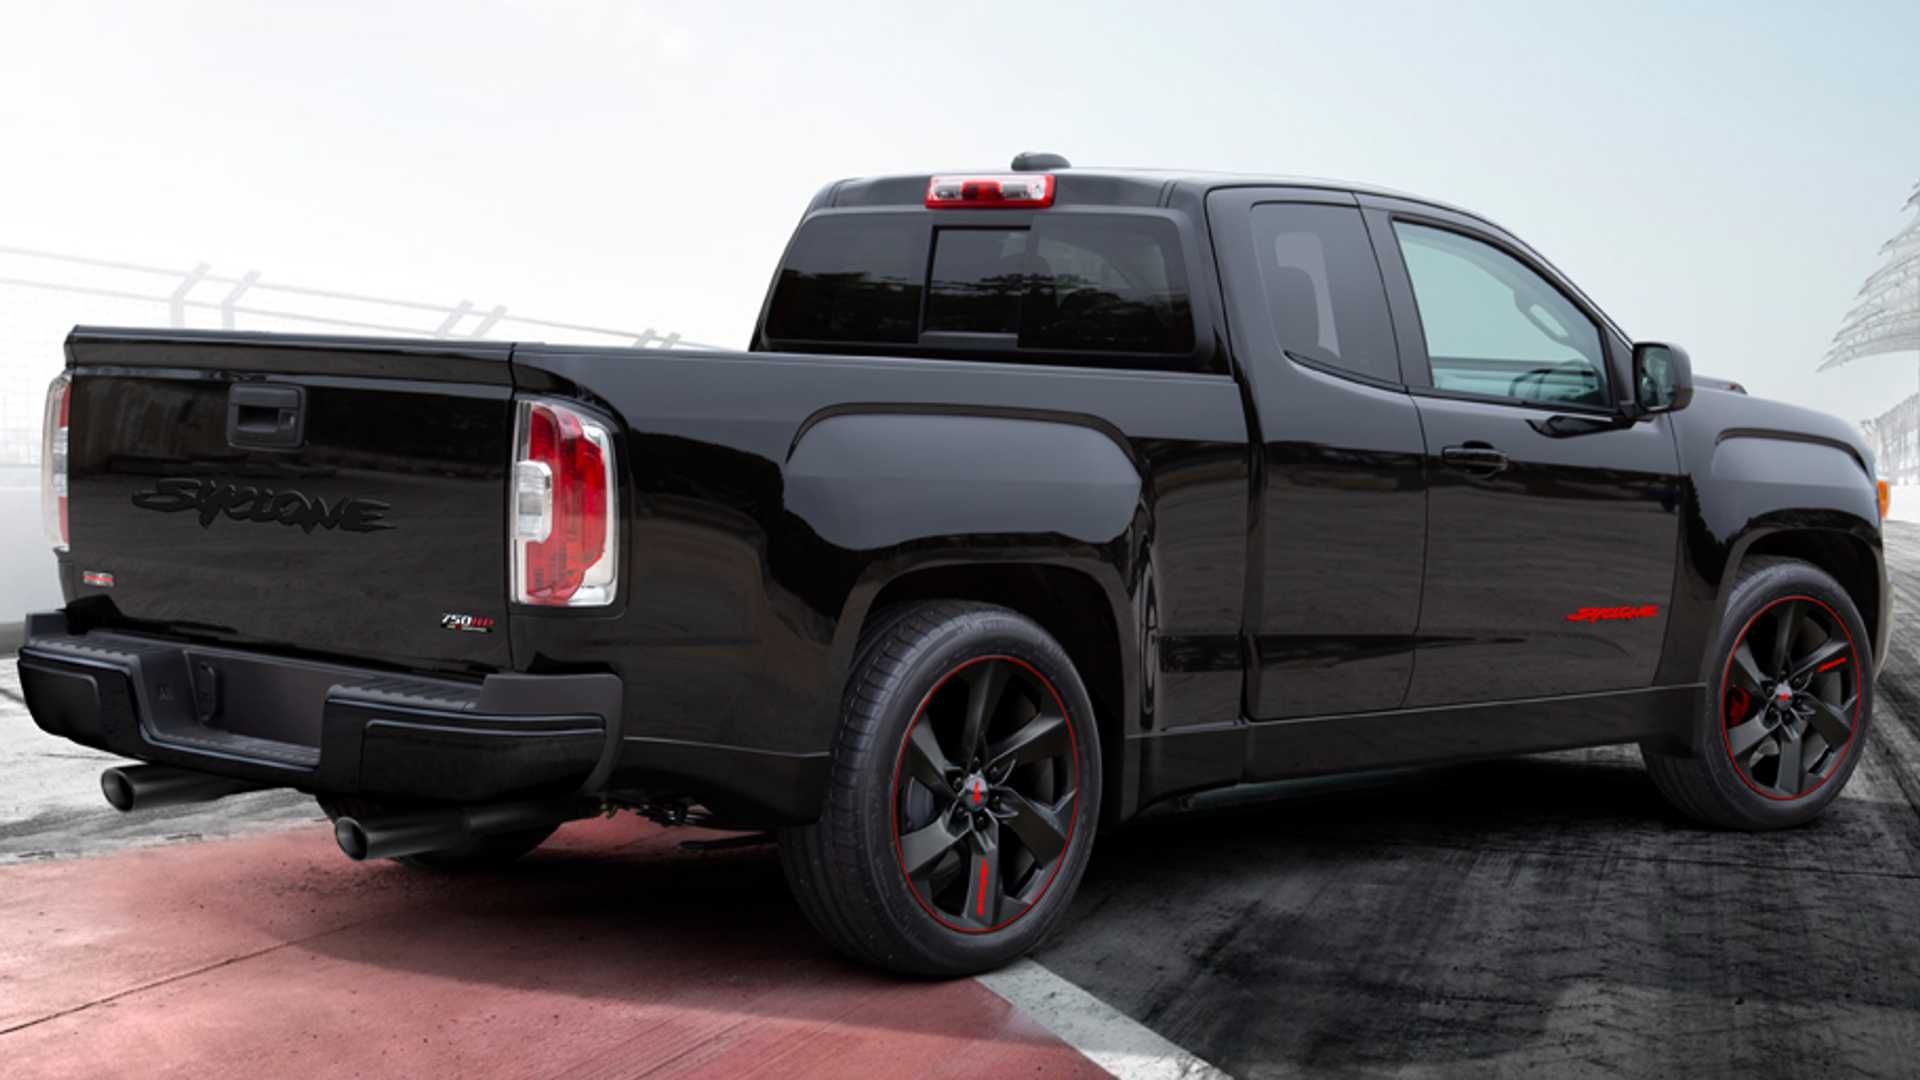 2021 GMC Canyon Syclone by Specialty Vehicle Engineering